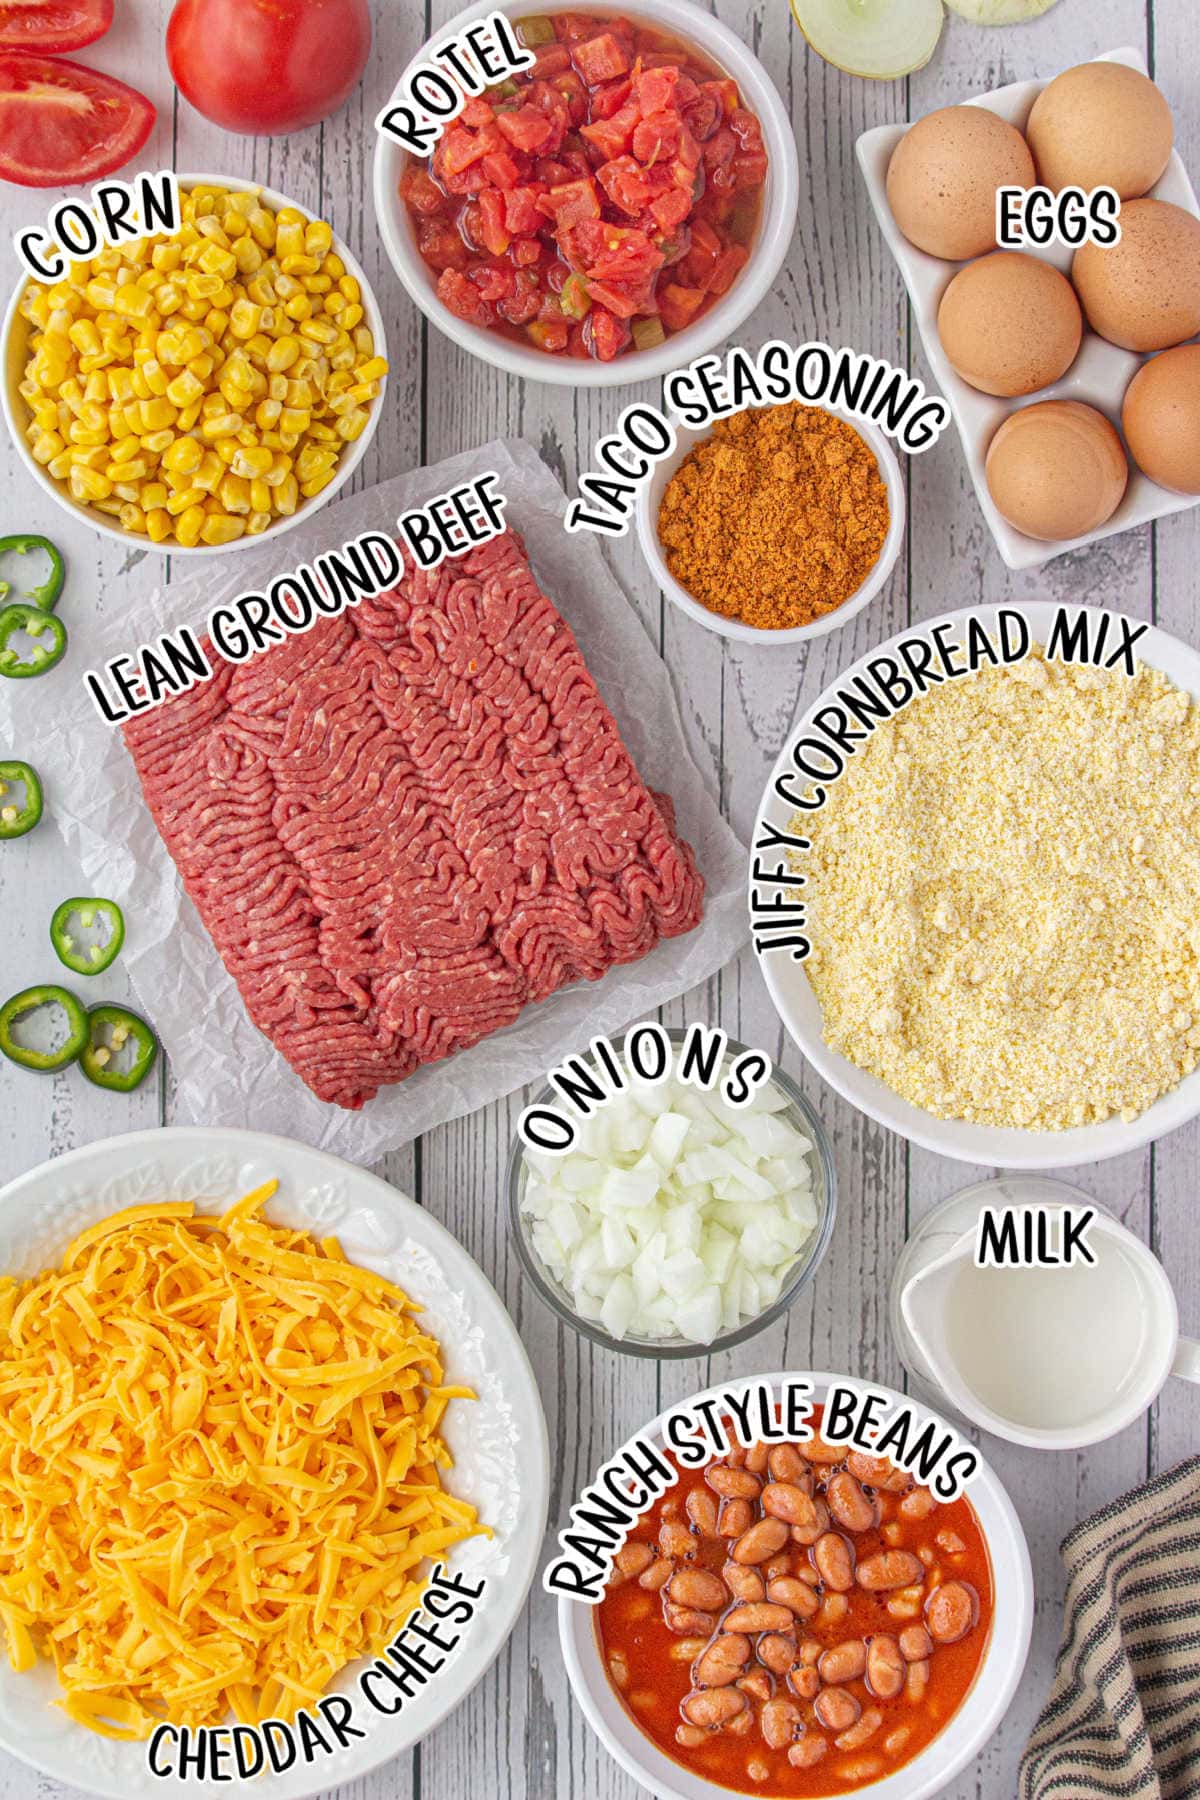 Labeled ingredients for cowboy cornbread casserole.